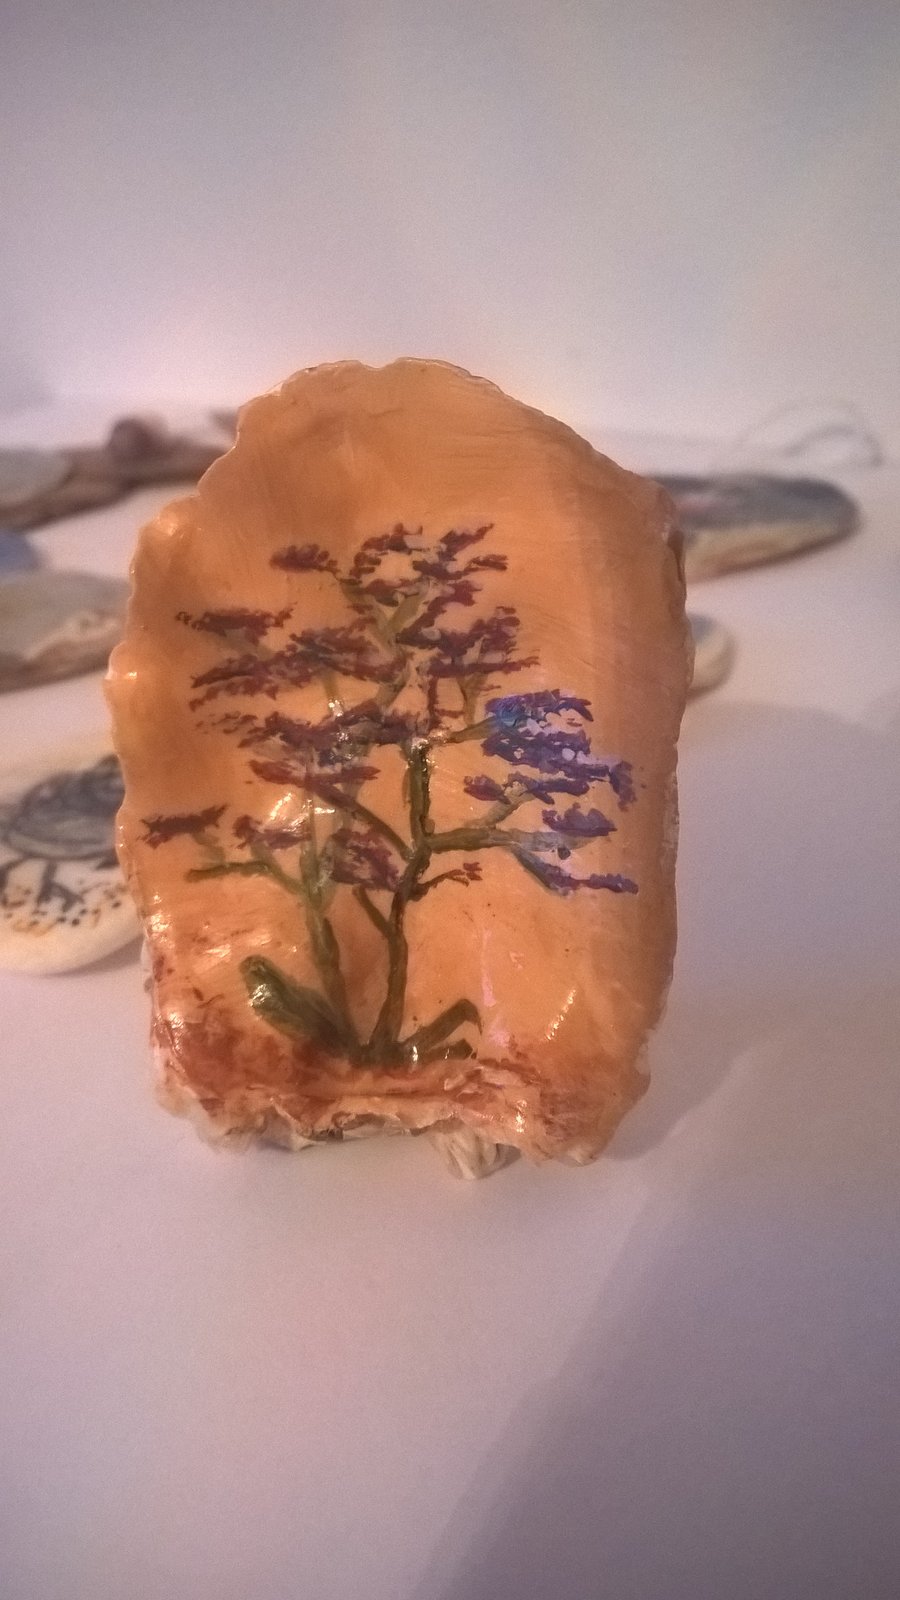 sea lavender on oyster shell